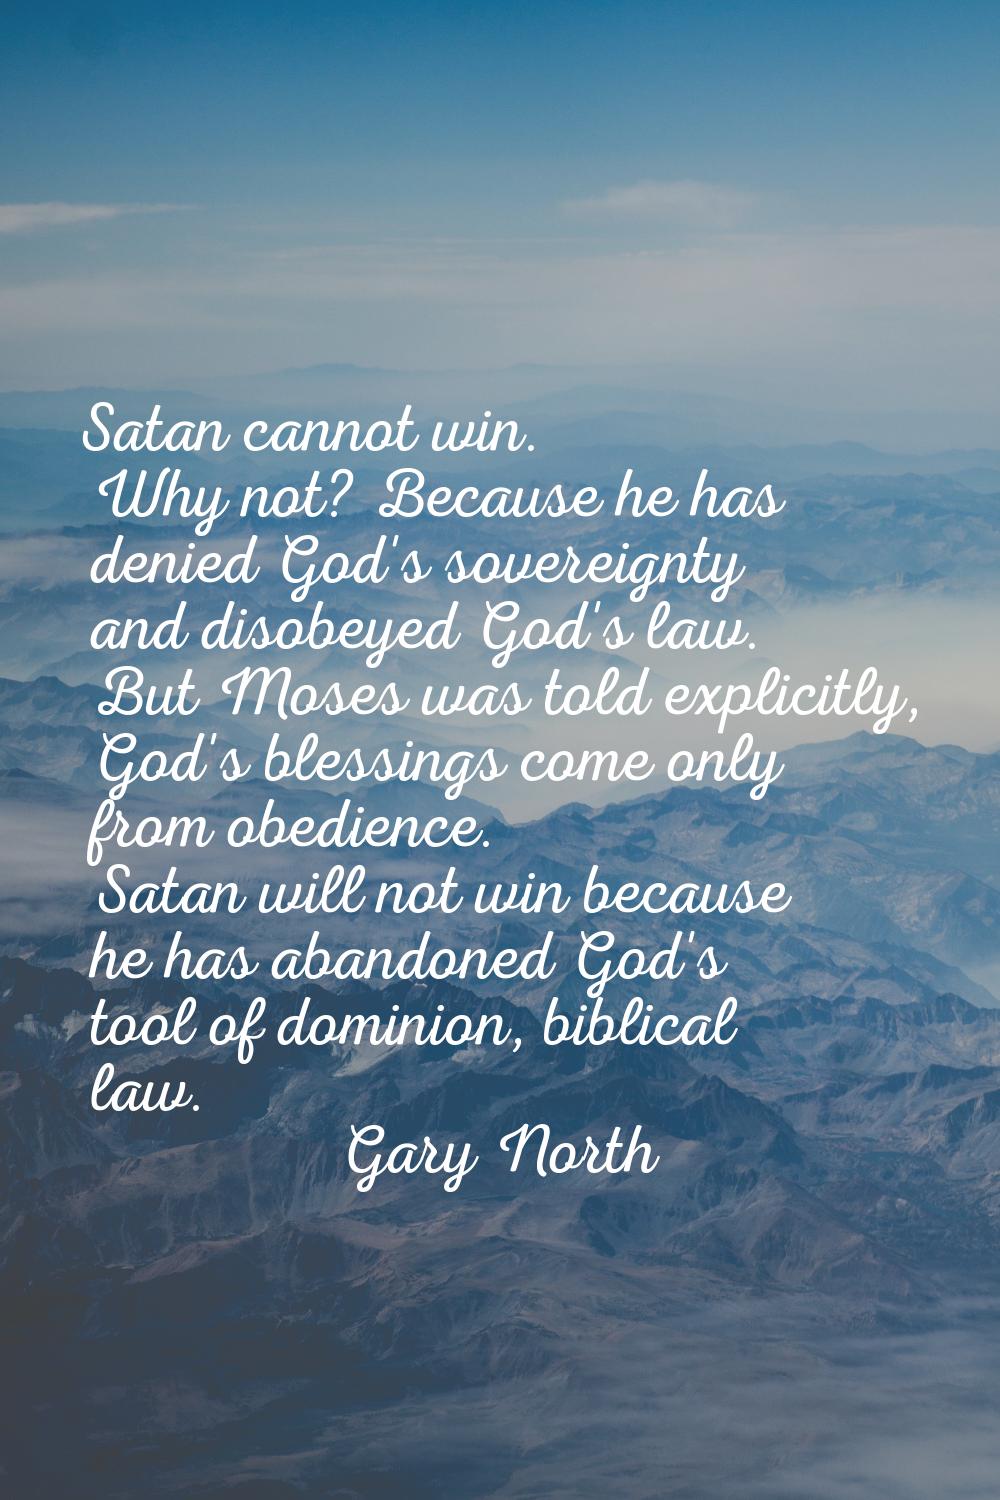 Satan cannot win. Why not? Because he has denied God's sovereignty and disobeyed God's law. But Mos